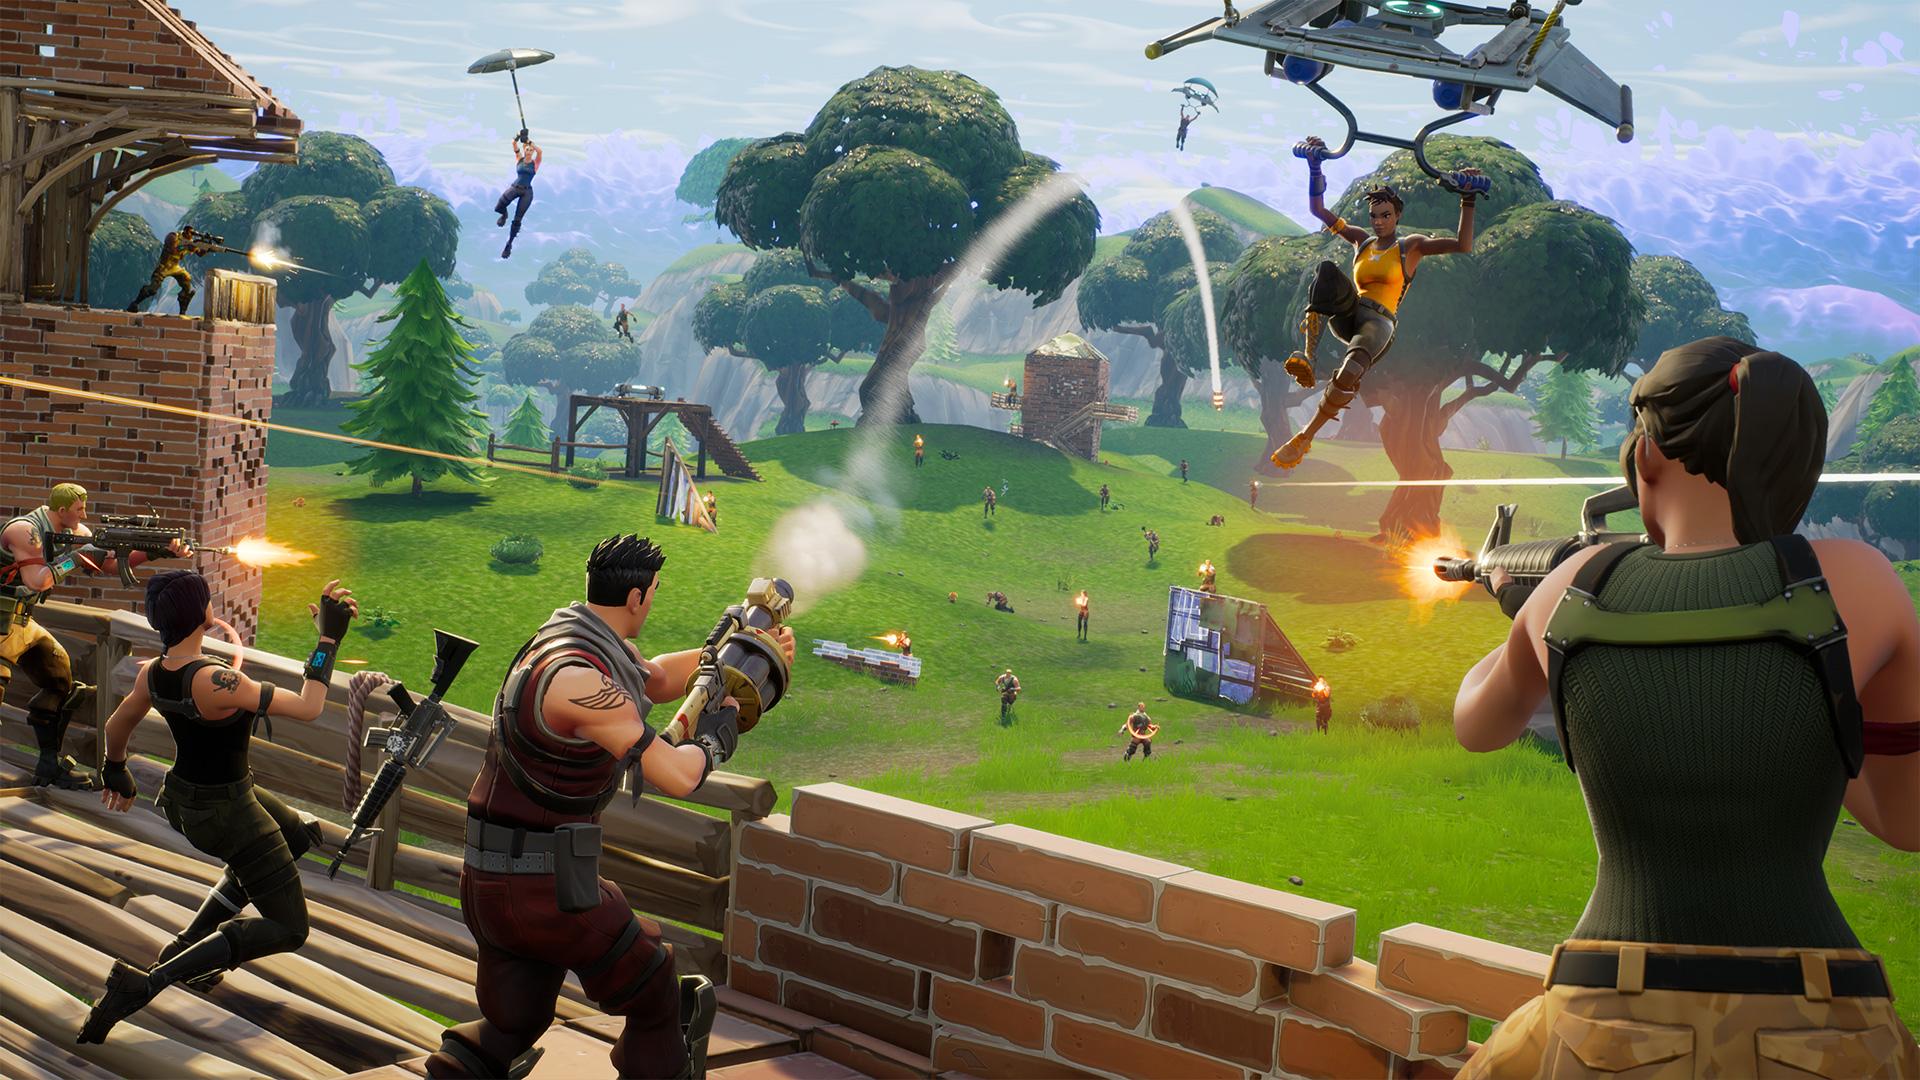 How to Enable Crossplay in Fortnite (PS4, Xbox One, Switch, & PC)